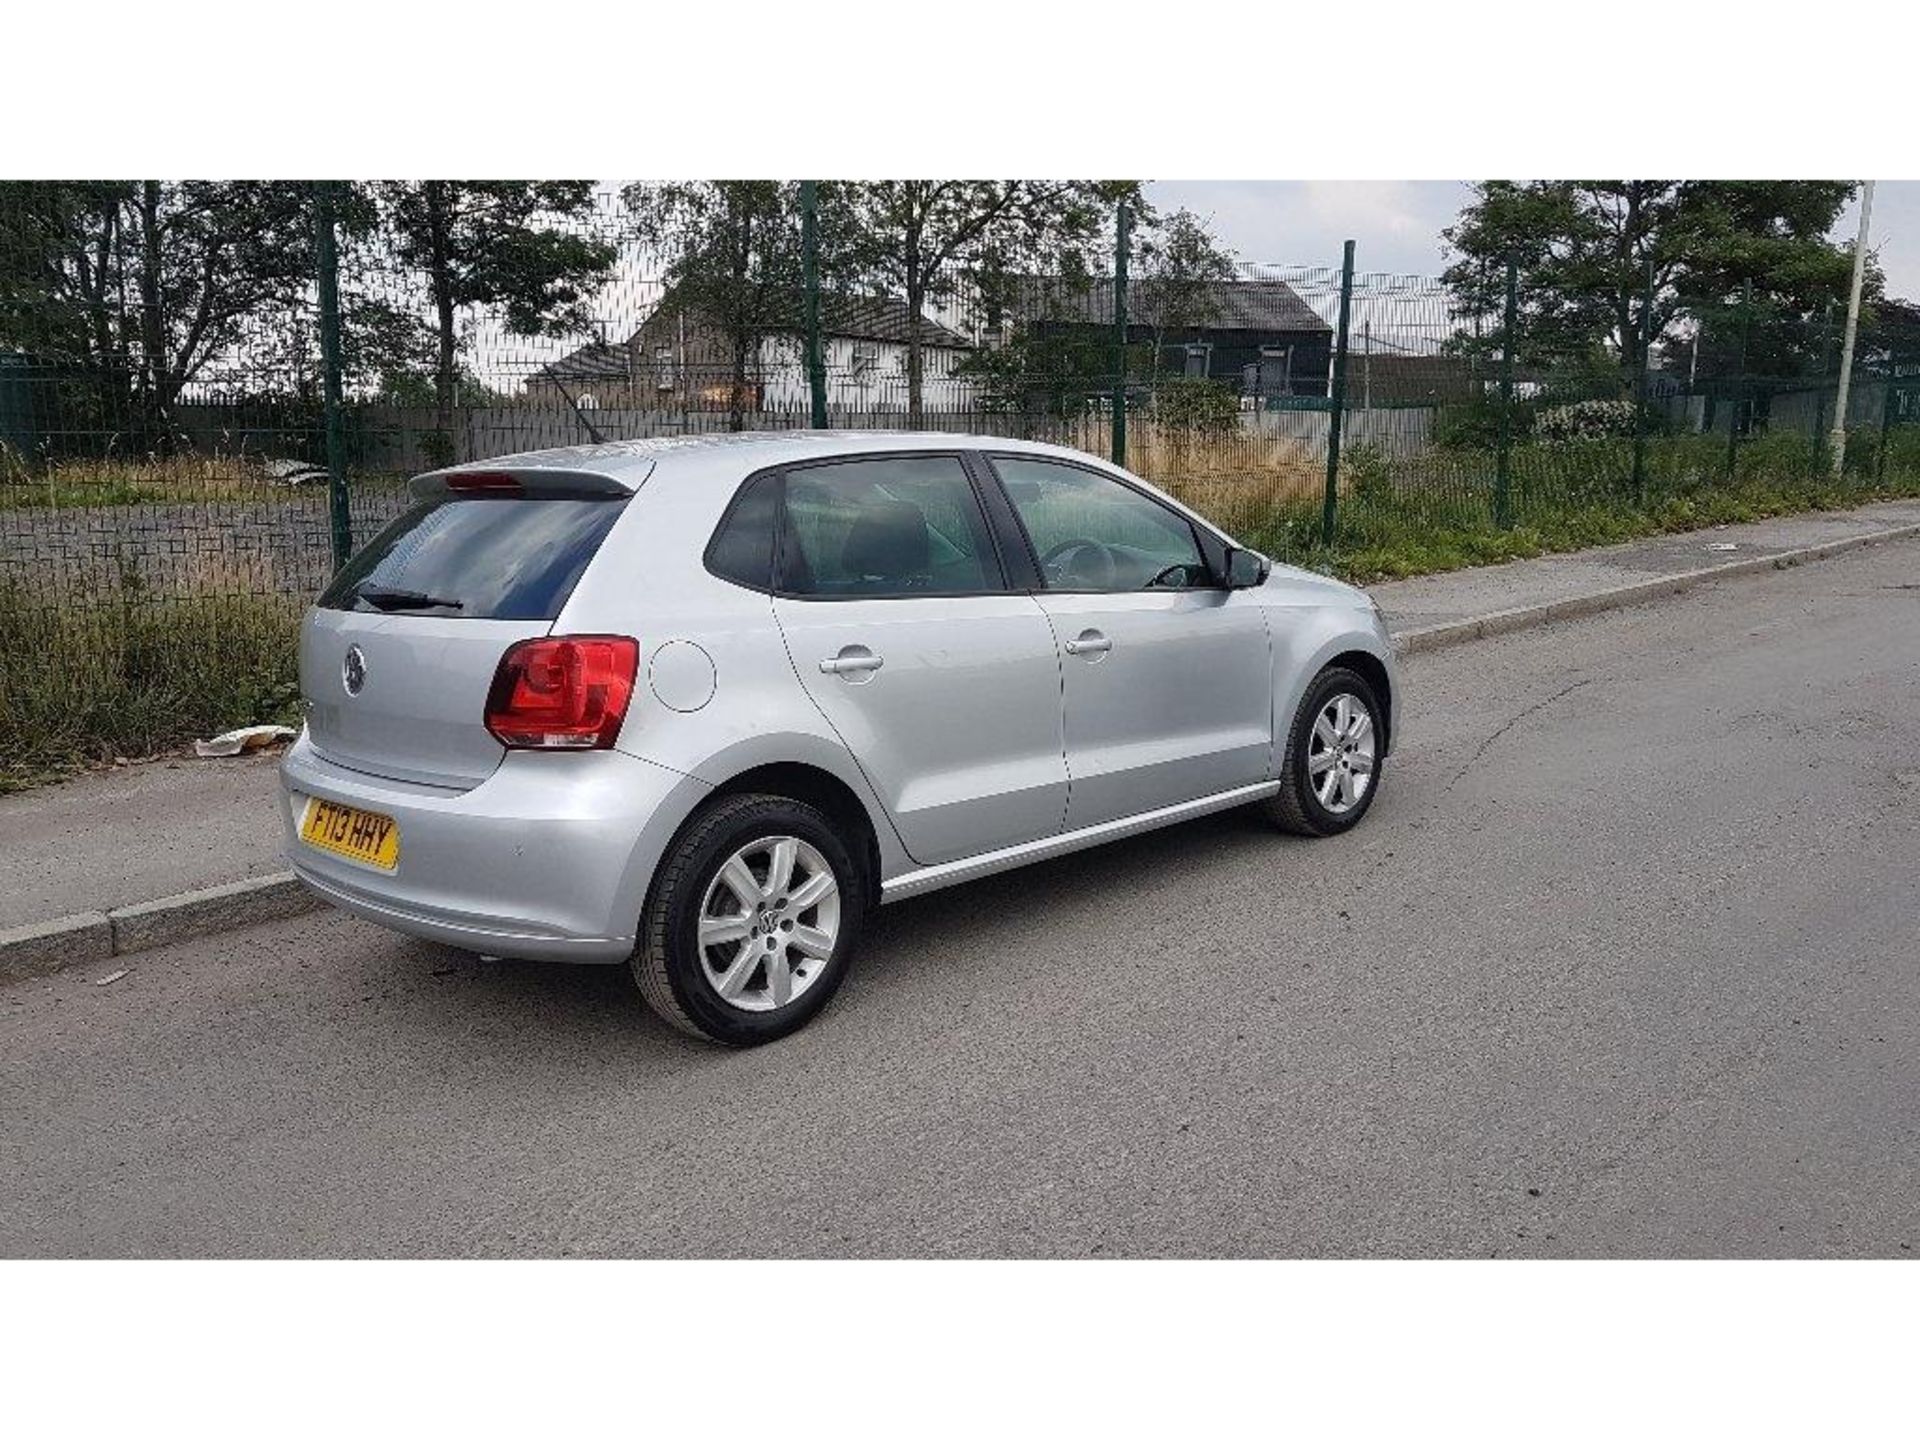 VOLKSWAGEN POLO 1.2 MATCH EDITION 5DR, FT13 HHY, 20.05.2013, PETROL, MILEAGE 28,499, MANUAL, 1.2L, 2 - Image 7 of 19